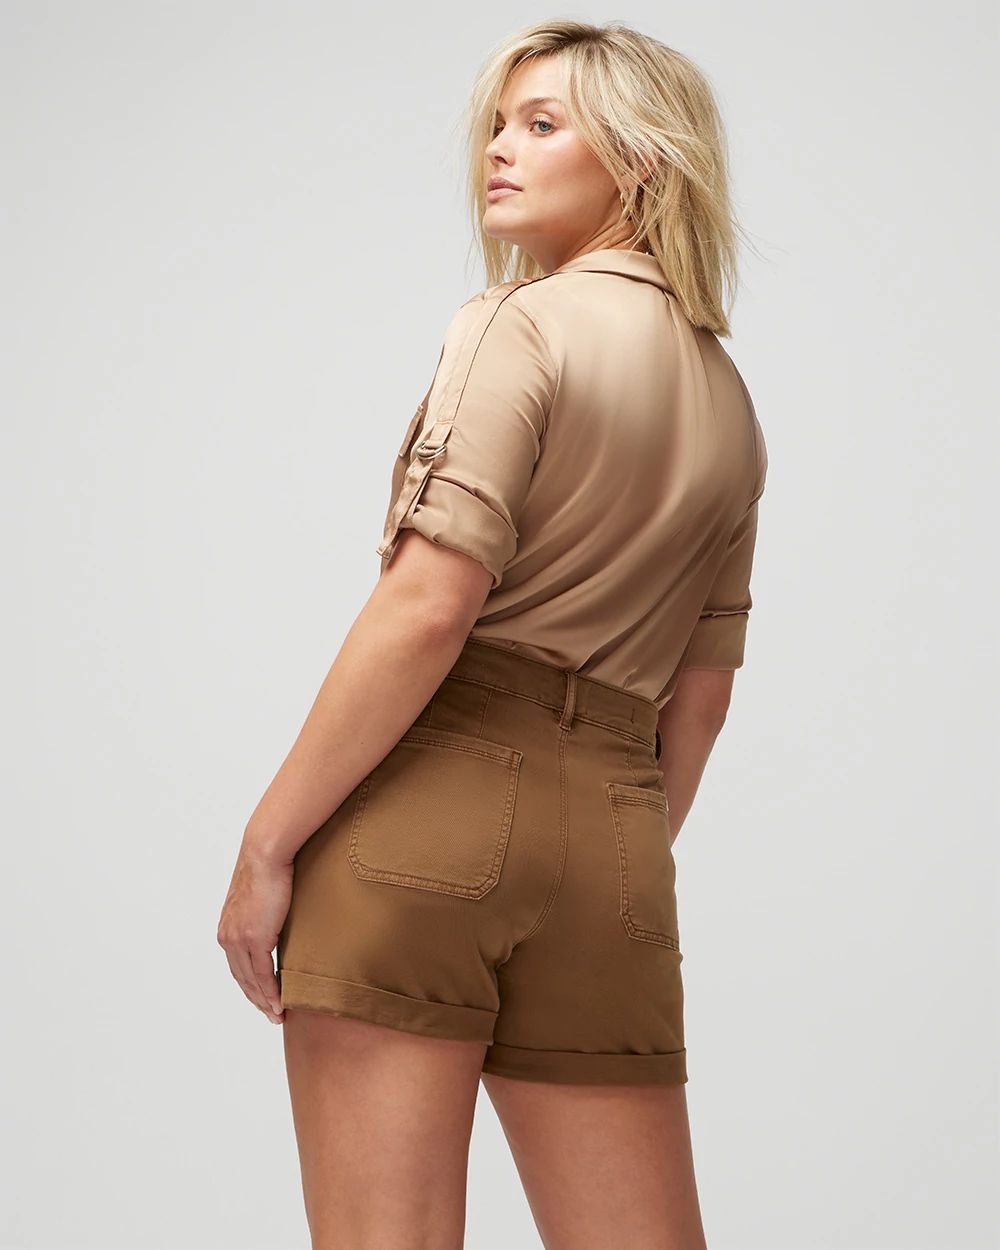 Curvy Mid-Rise Pret-A-Play Shorts click to view larger image.